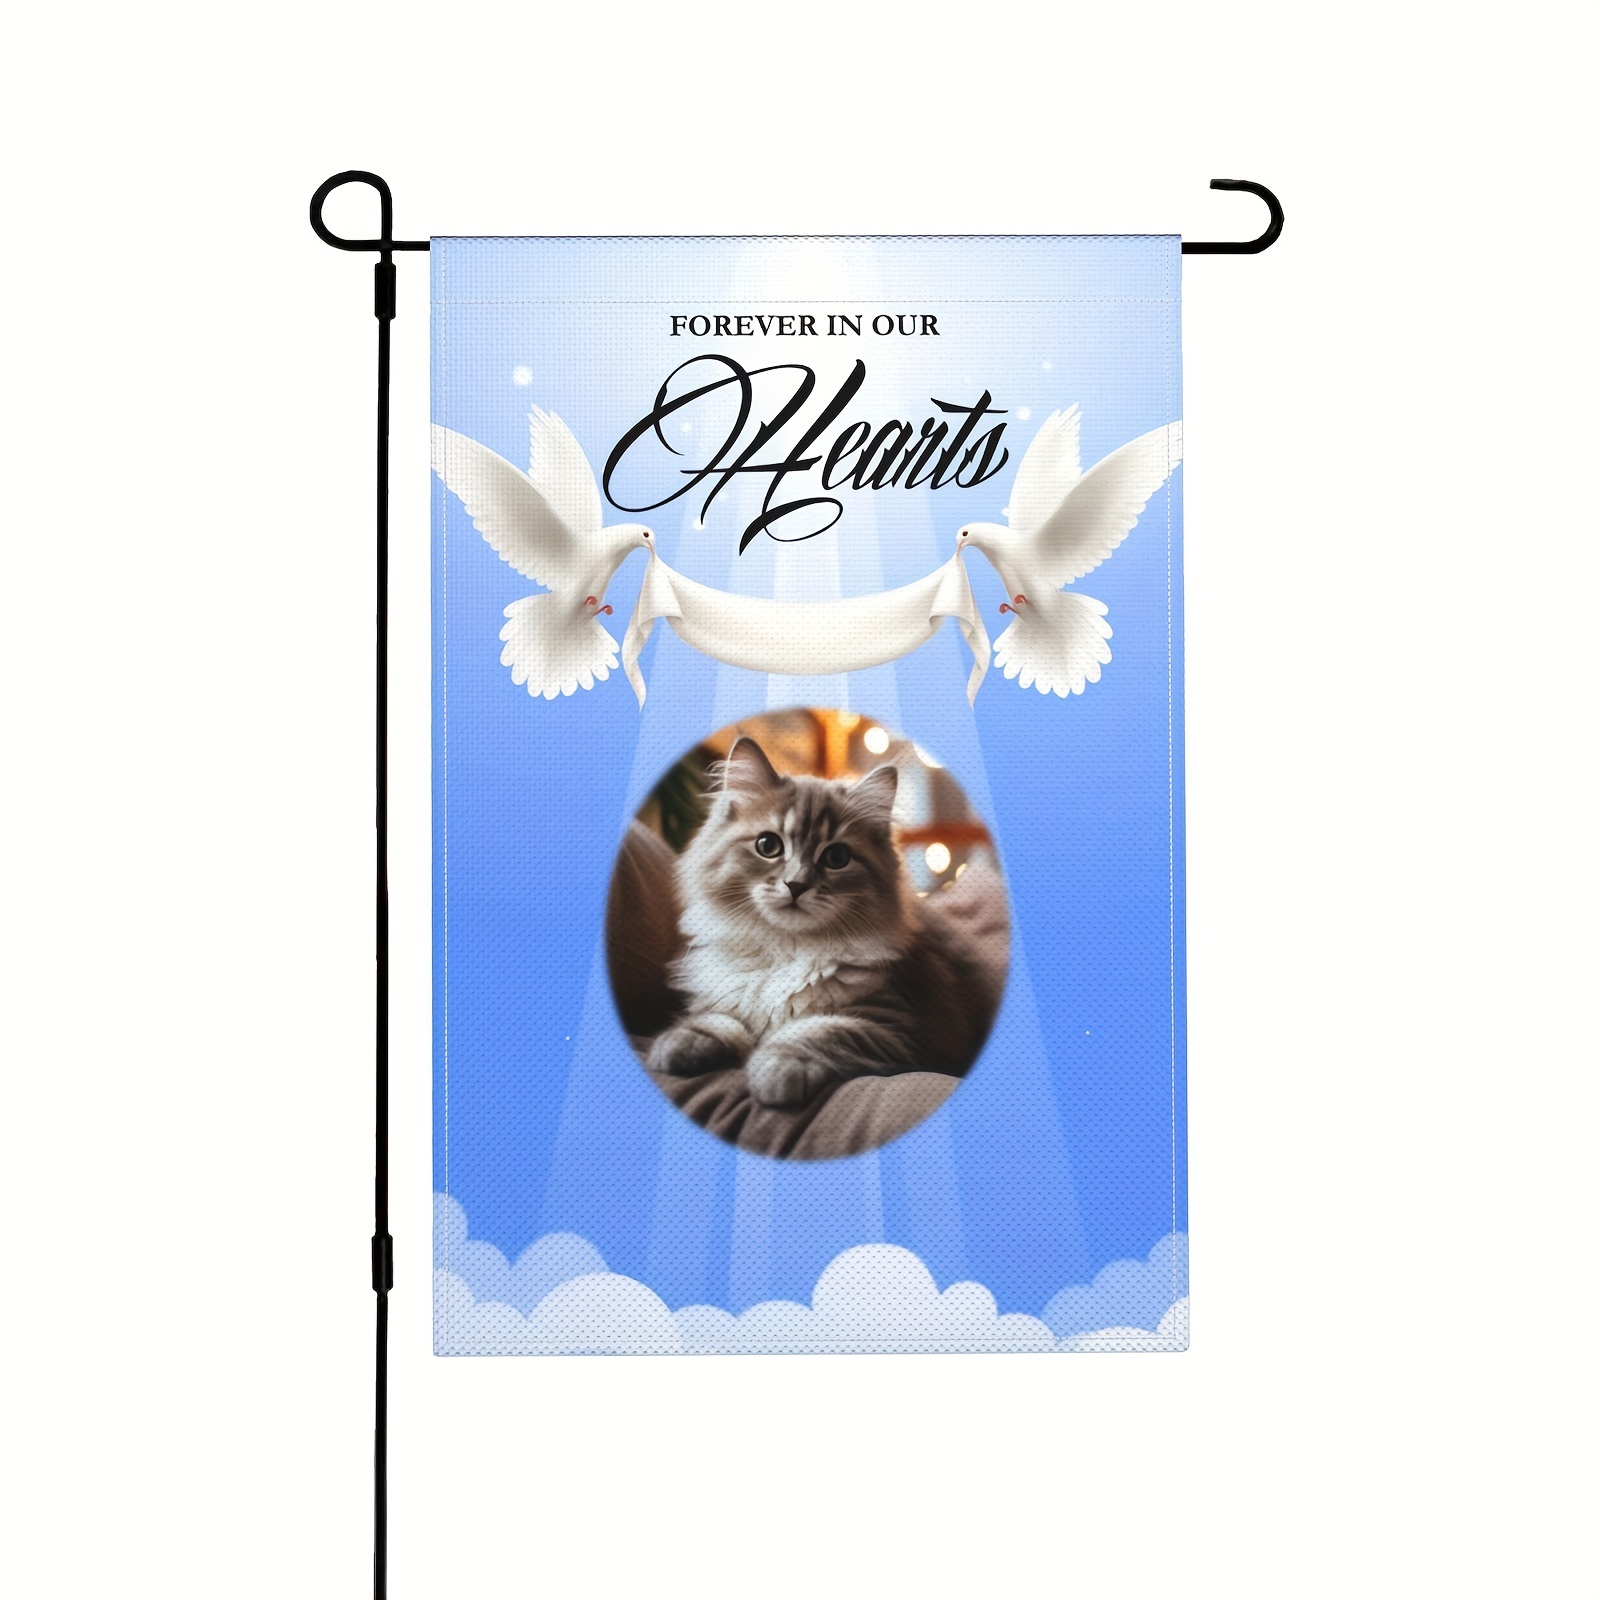 

1pc Personalized Dog Memorial Garden Flag, Garden Flags With Pet Photo, Dog Memorial Flag, Pet Cemetery Flag, Pet Loss Sympathy Gift, No Metal Stand